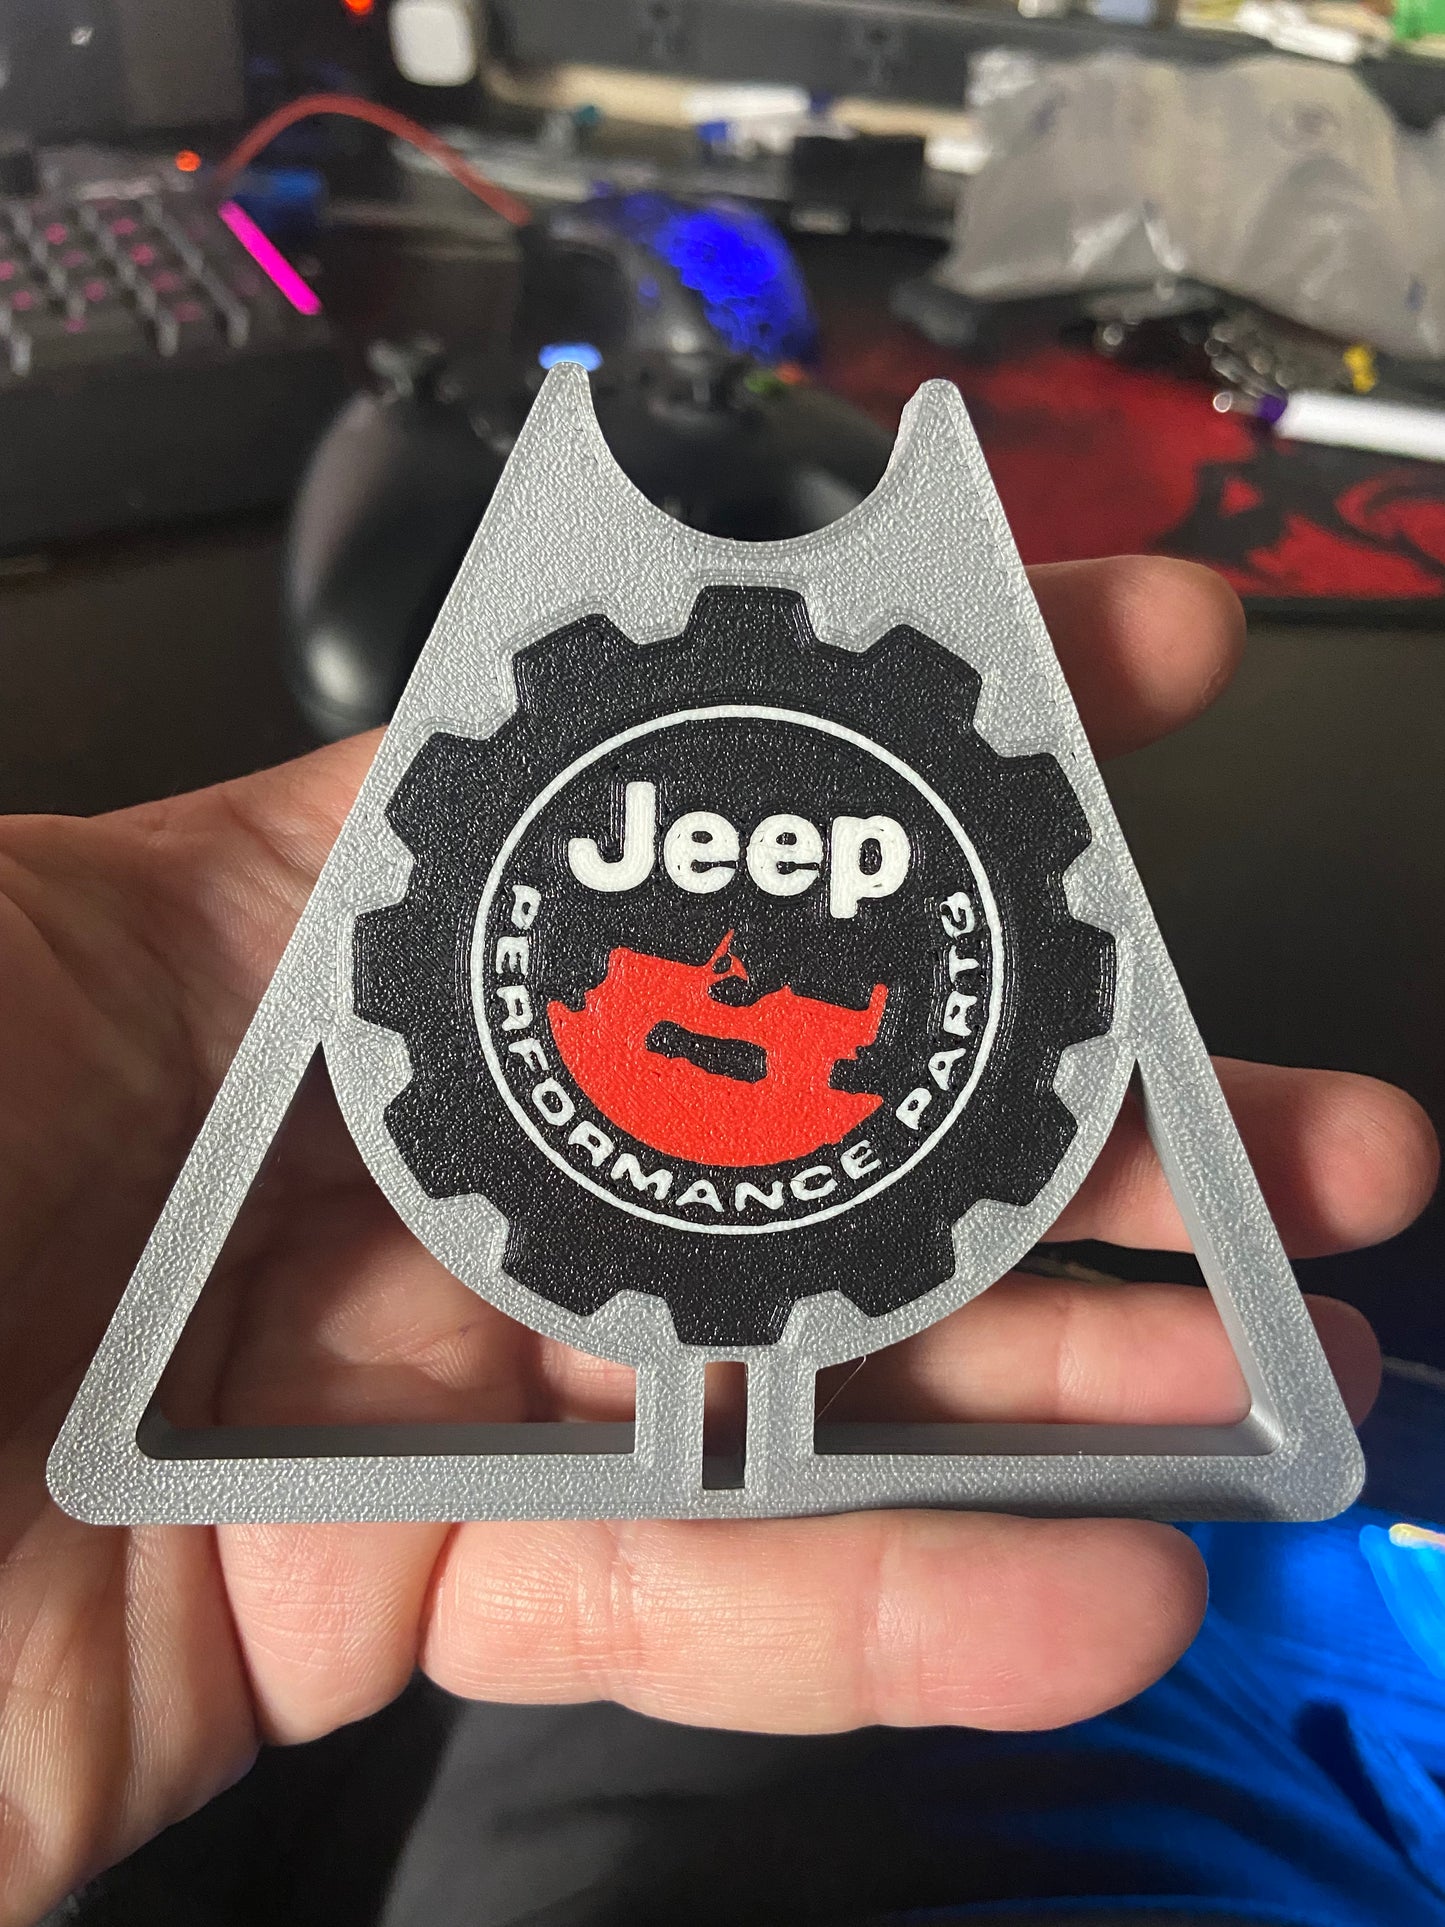 Jeep JK Gear Vintage style Off-road Logo RC Crawler Axle Stand